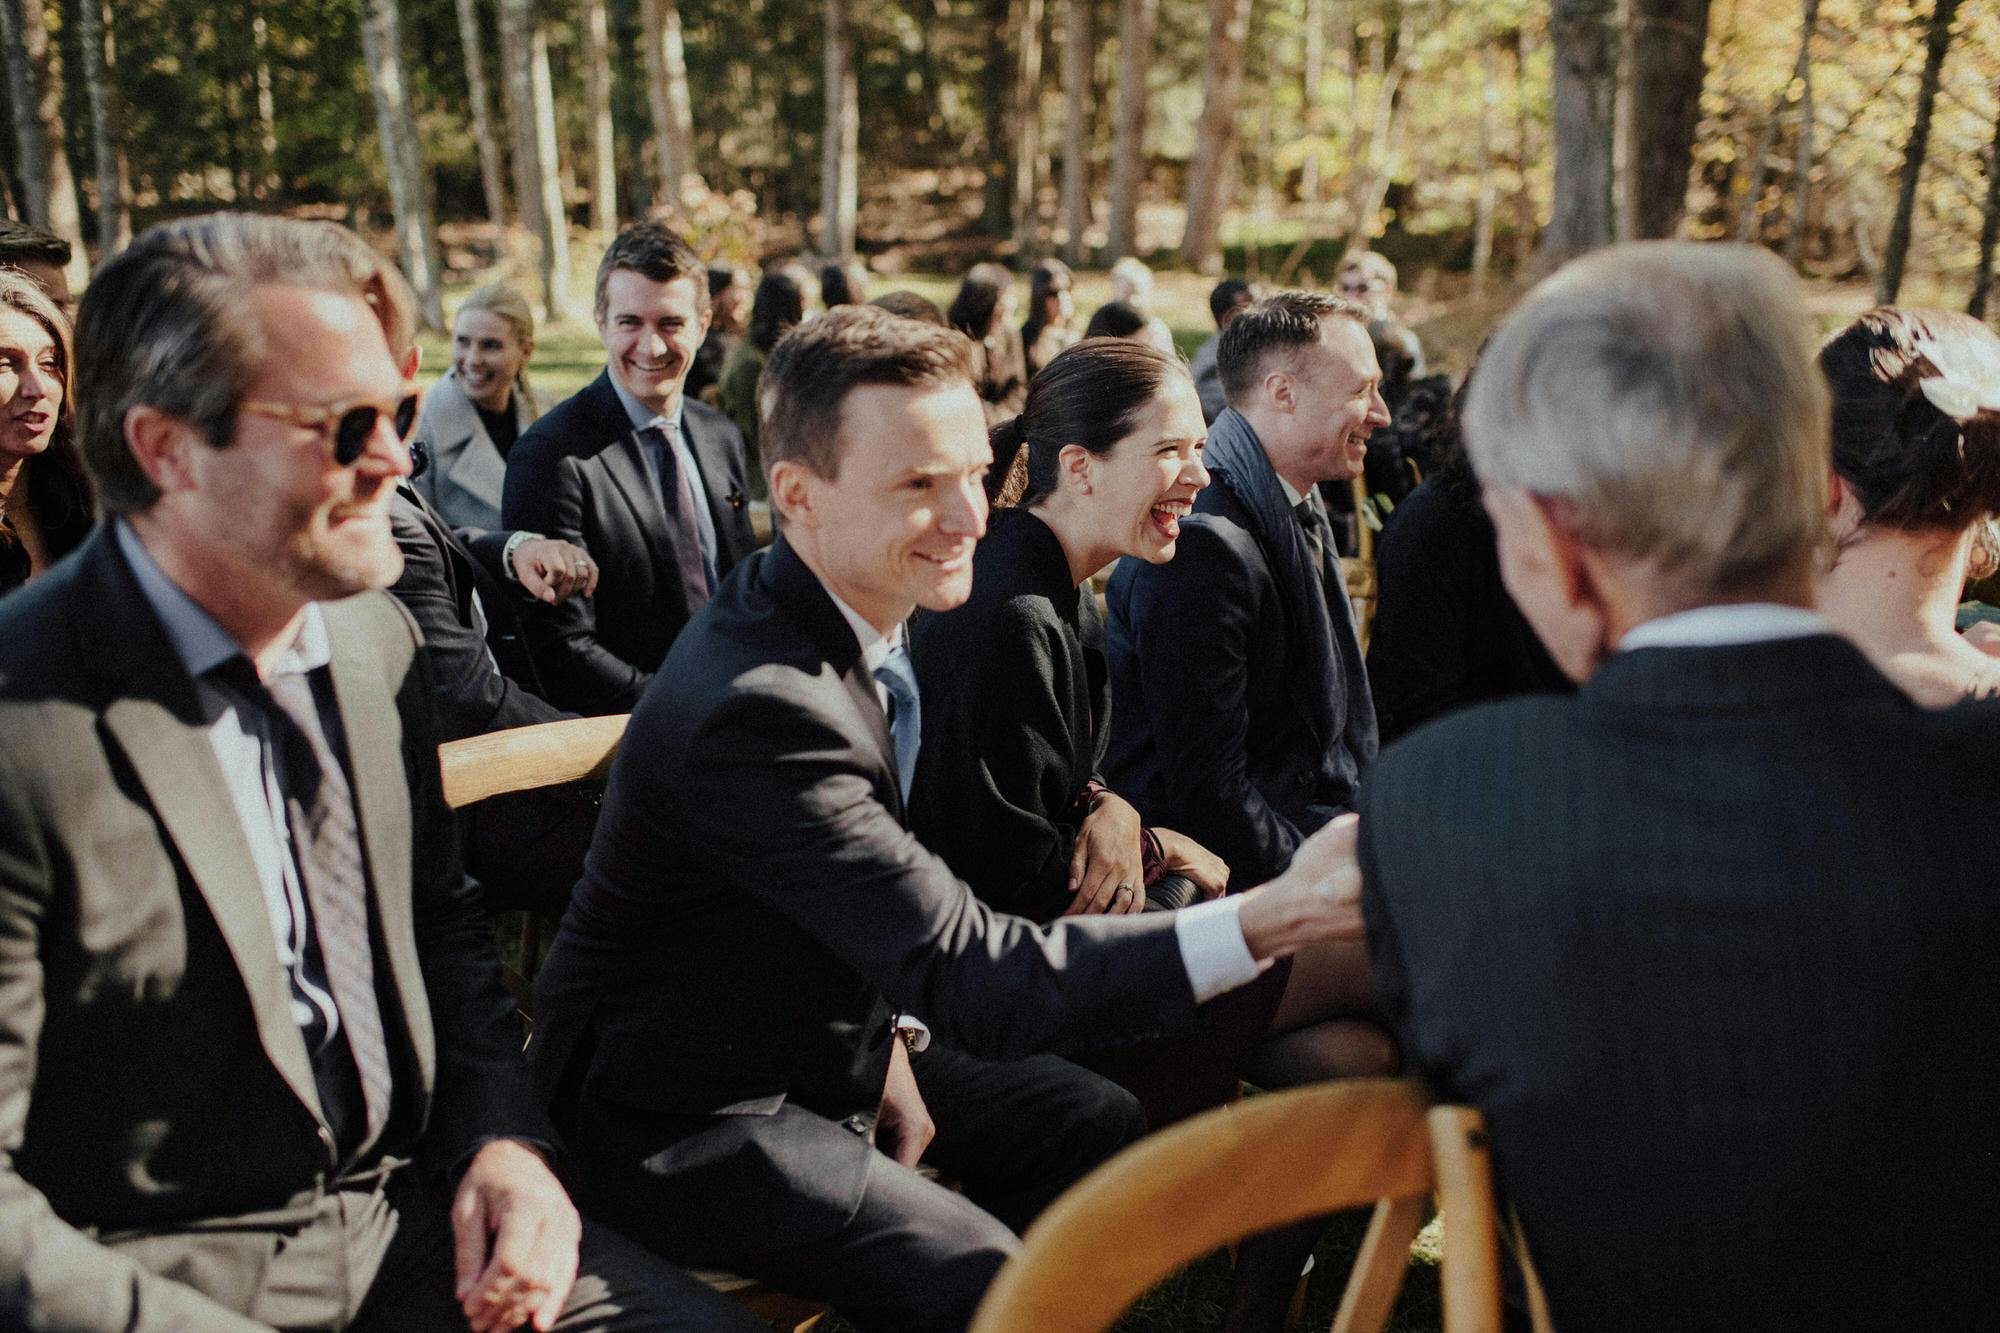 candid shots of guests at wedding in catskills